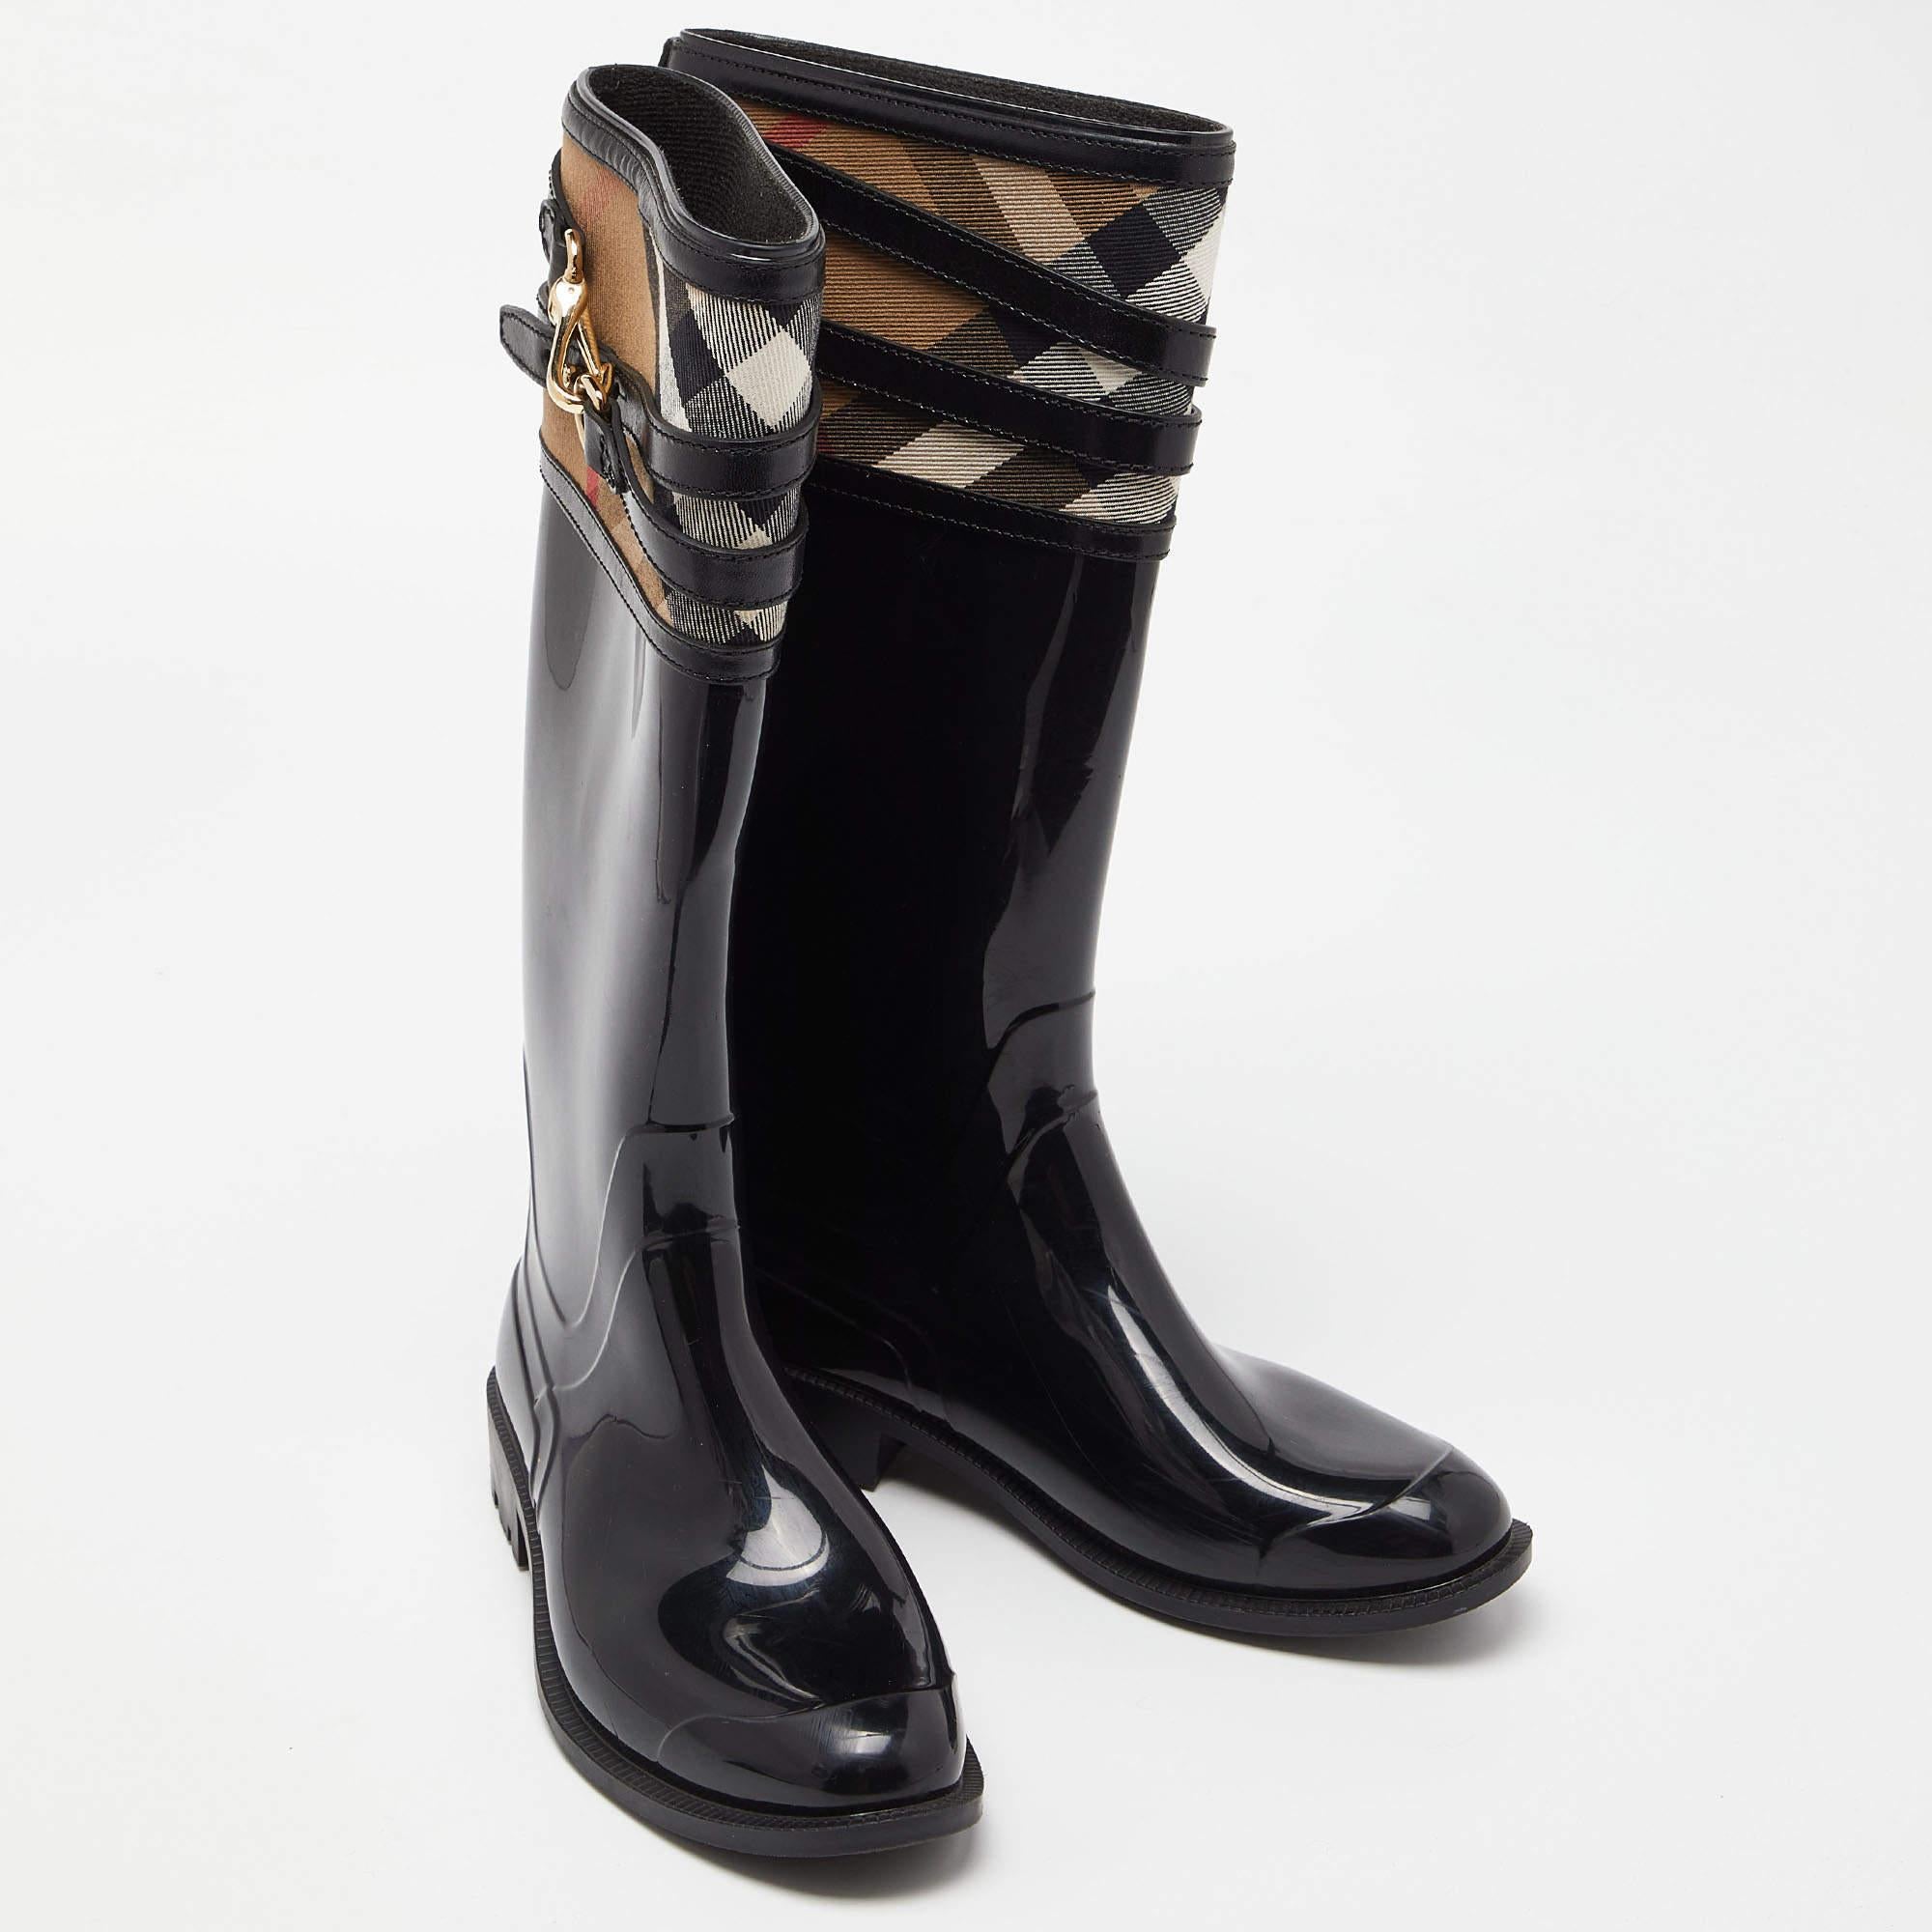 Burberry Black/Beige Patent Leather and House Check Canvas Knee Length Boots Siz In Excellent Condition For Sale In Dubai, Al Qouz 2